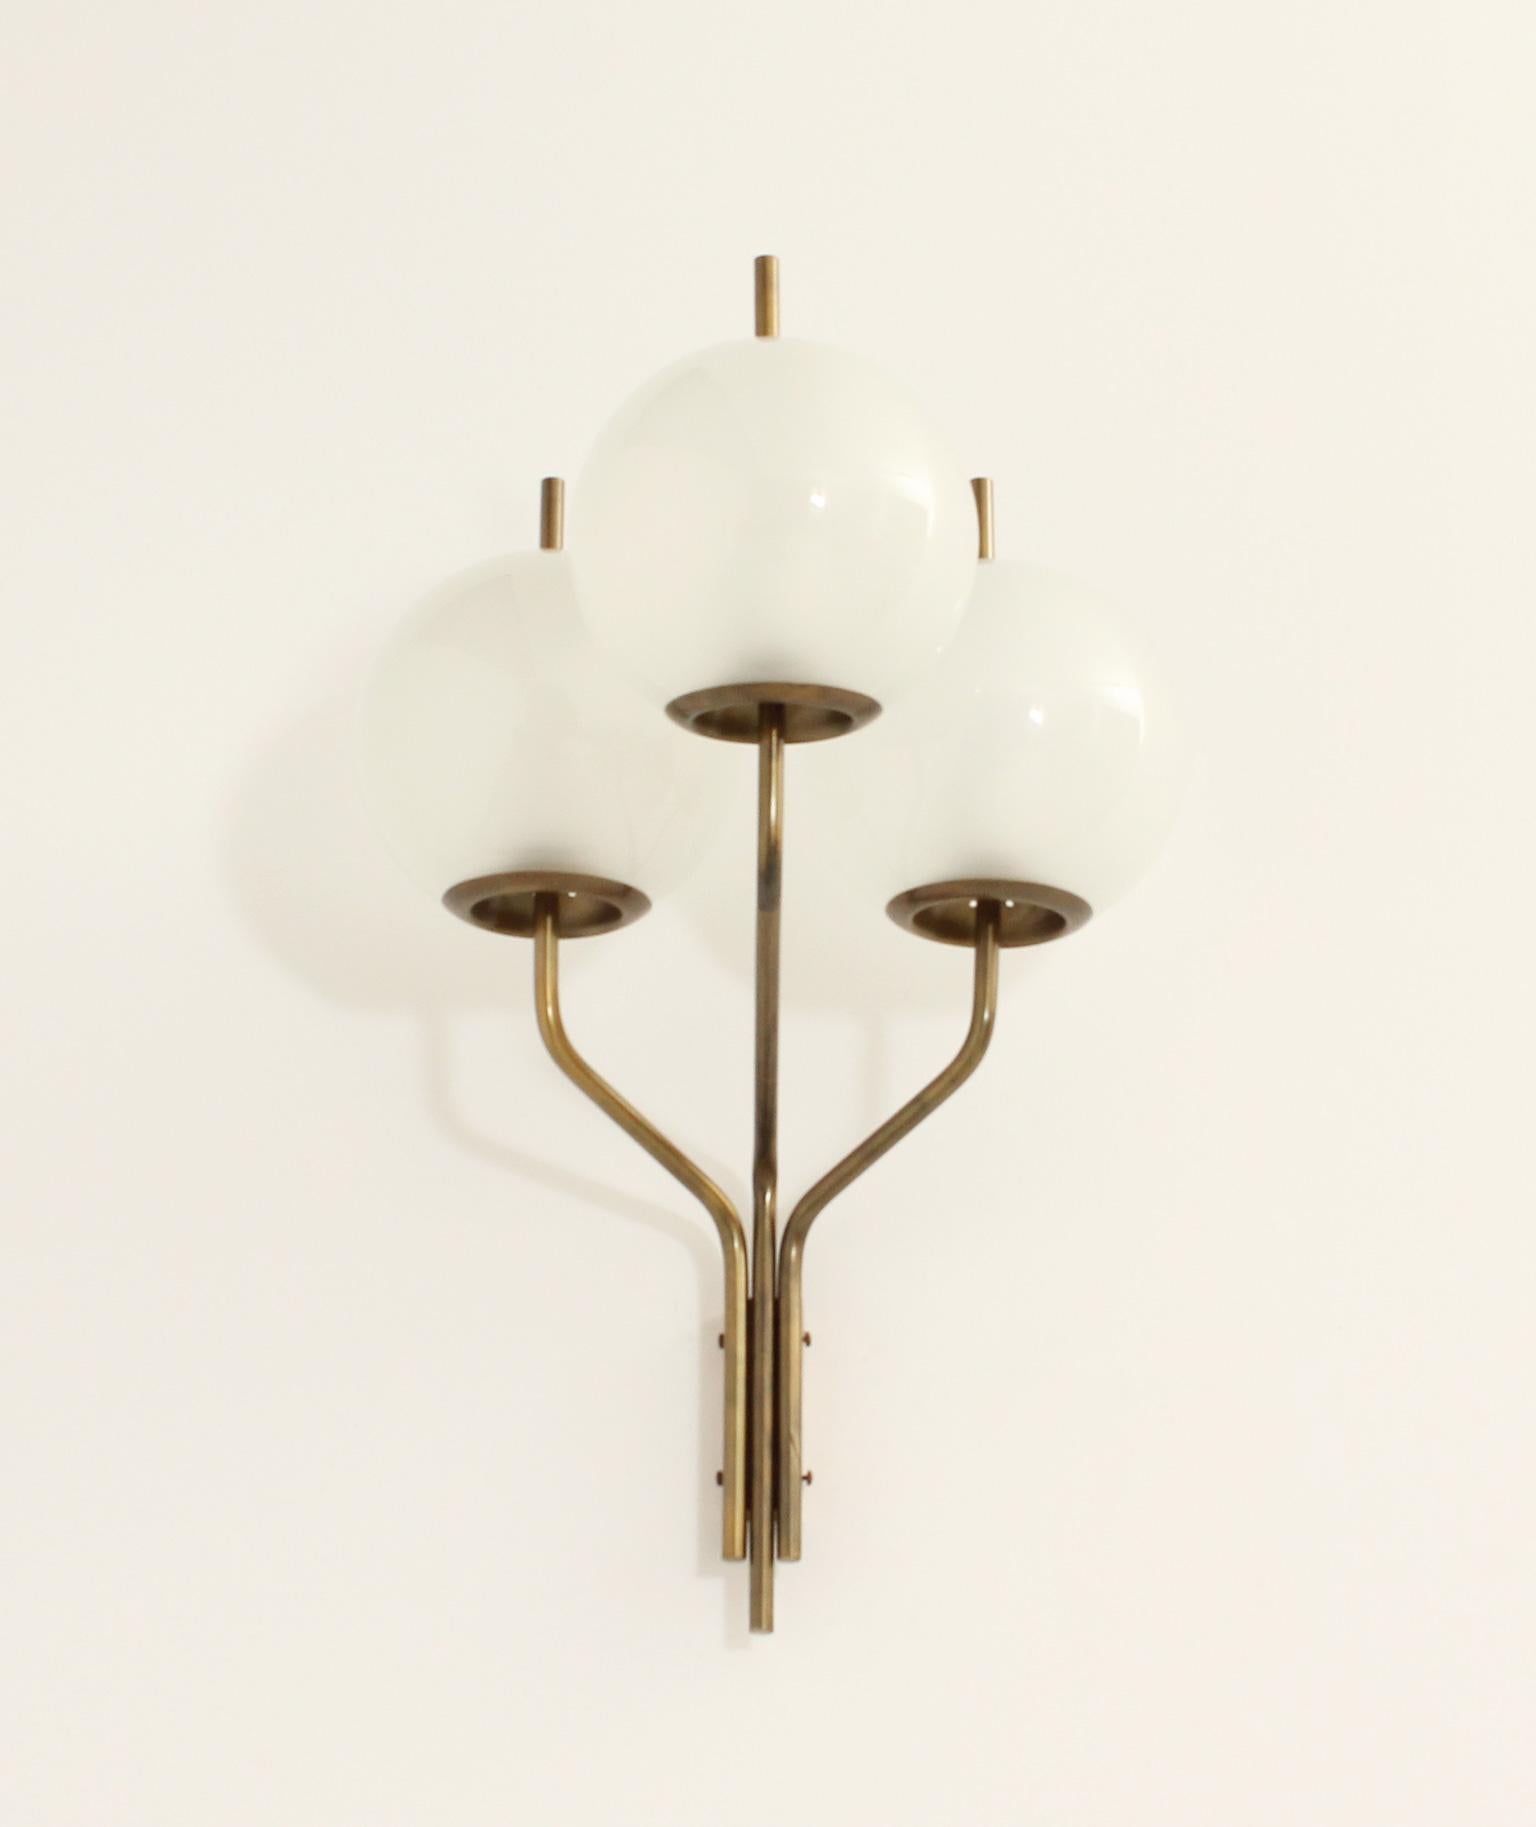 Large triple sconce produced in 1960s by Candle Milano, Italy. Three arms in brass with three globes in Murano glass with 24 cm Ø each.